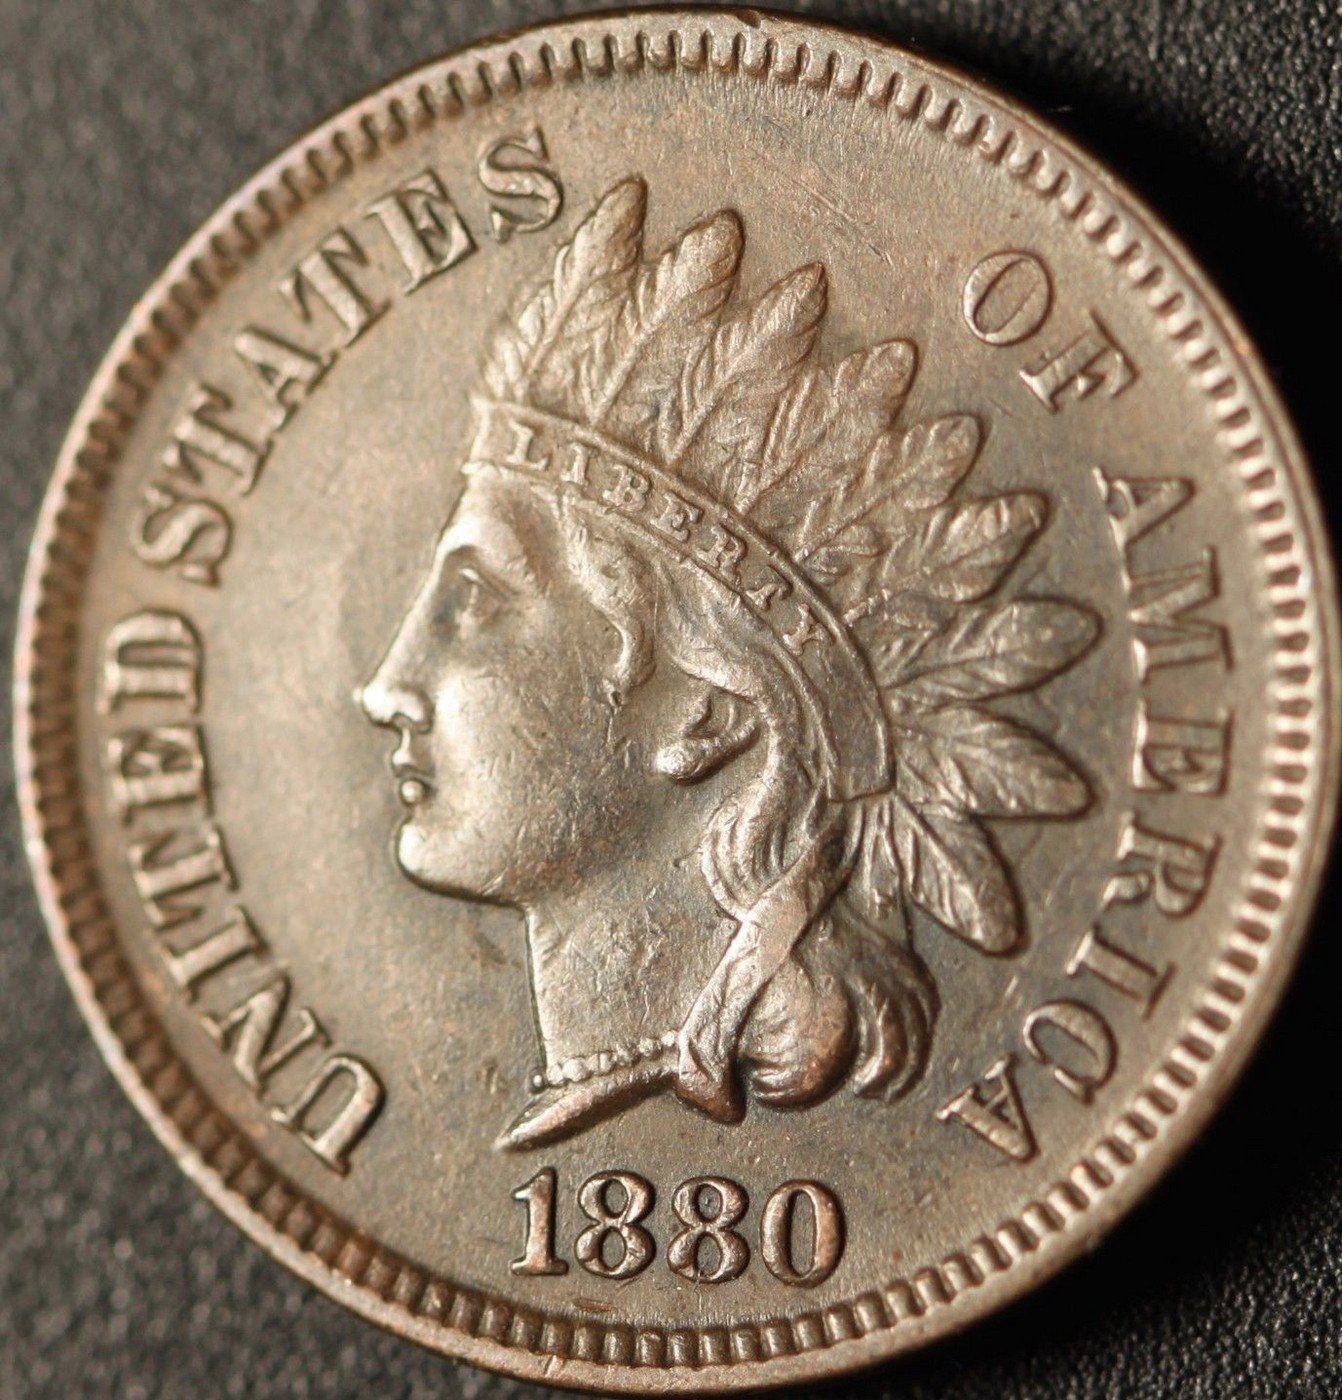 1880 PUN-005 - Indian Head Cent - Photo by Ed Nathanson